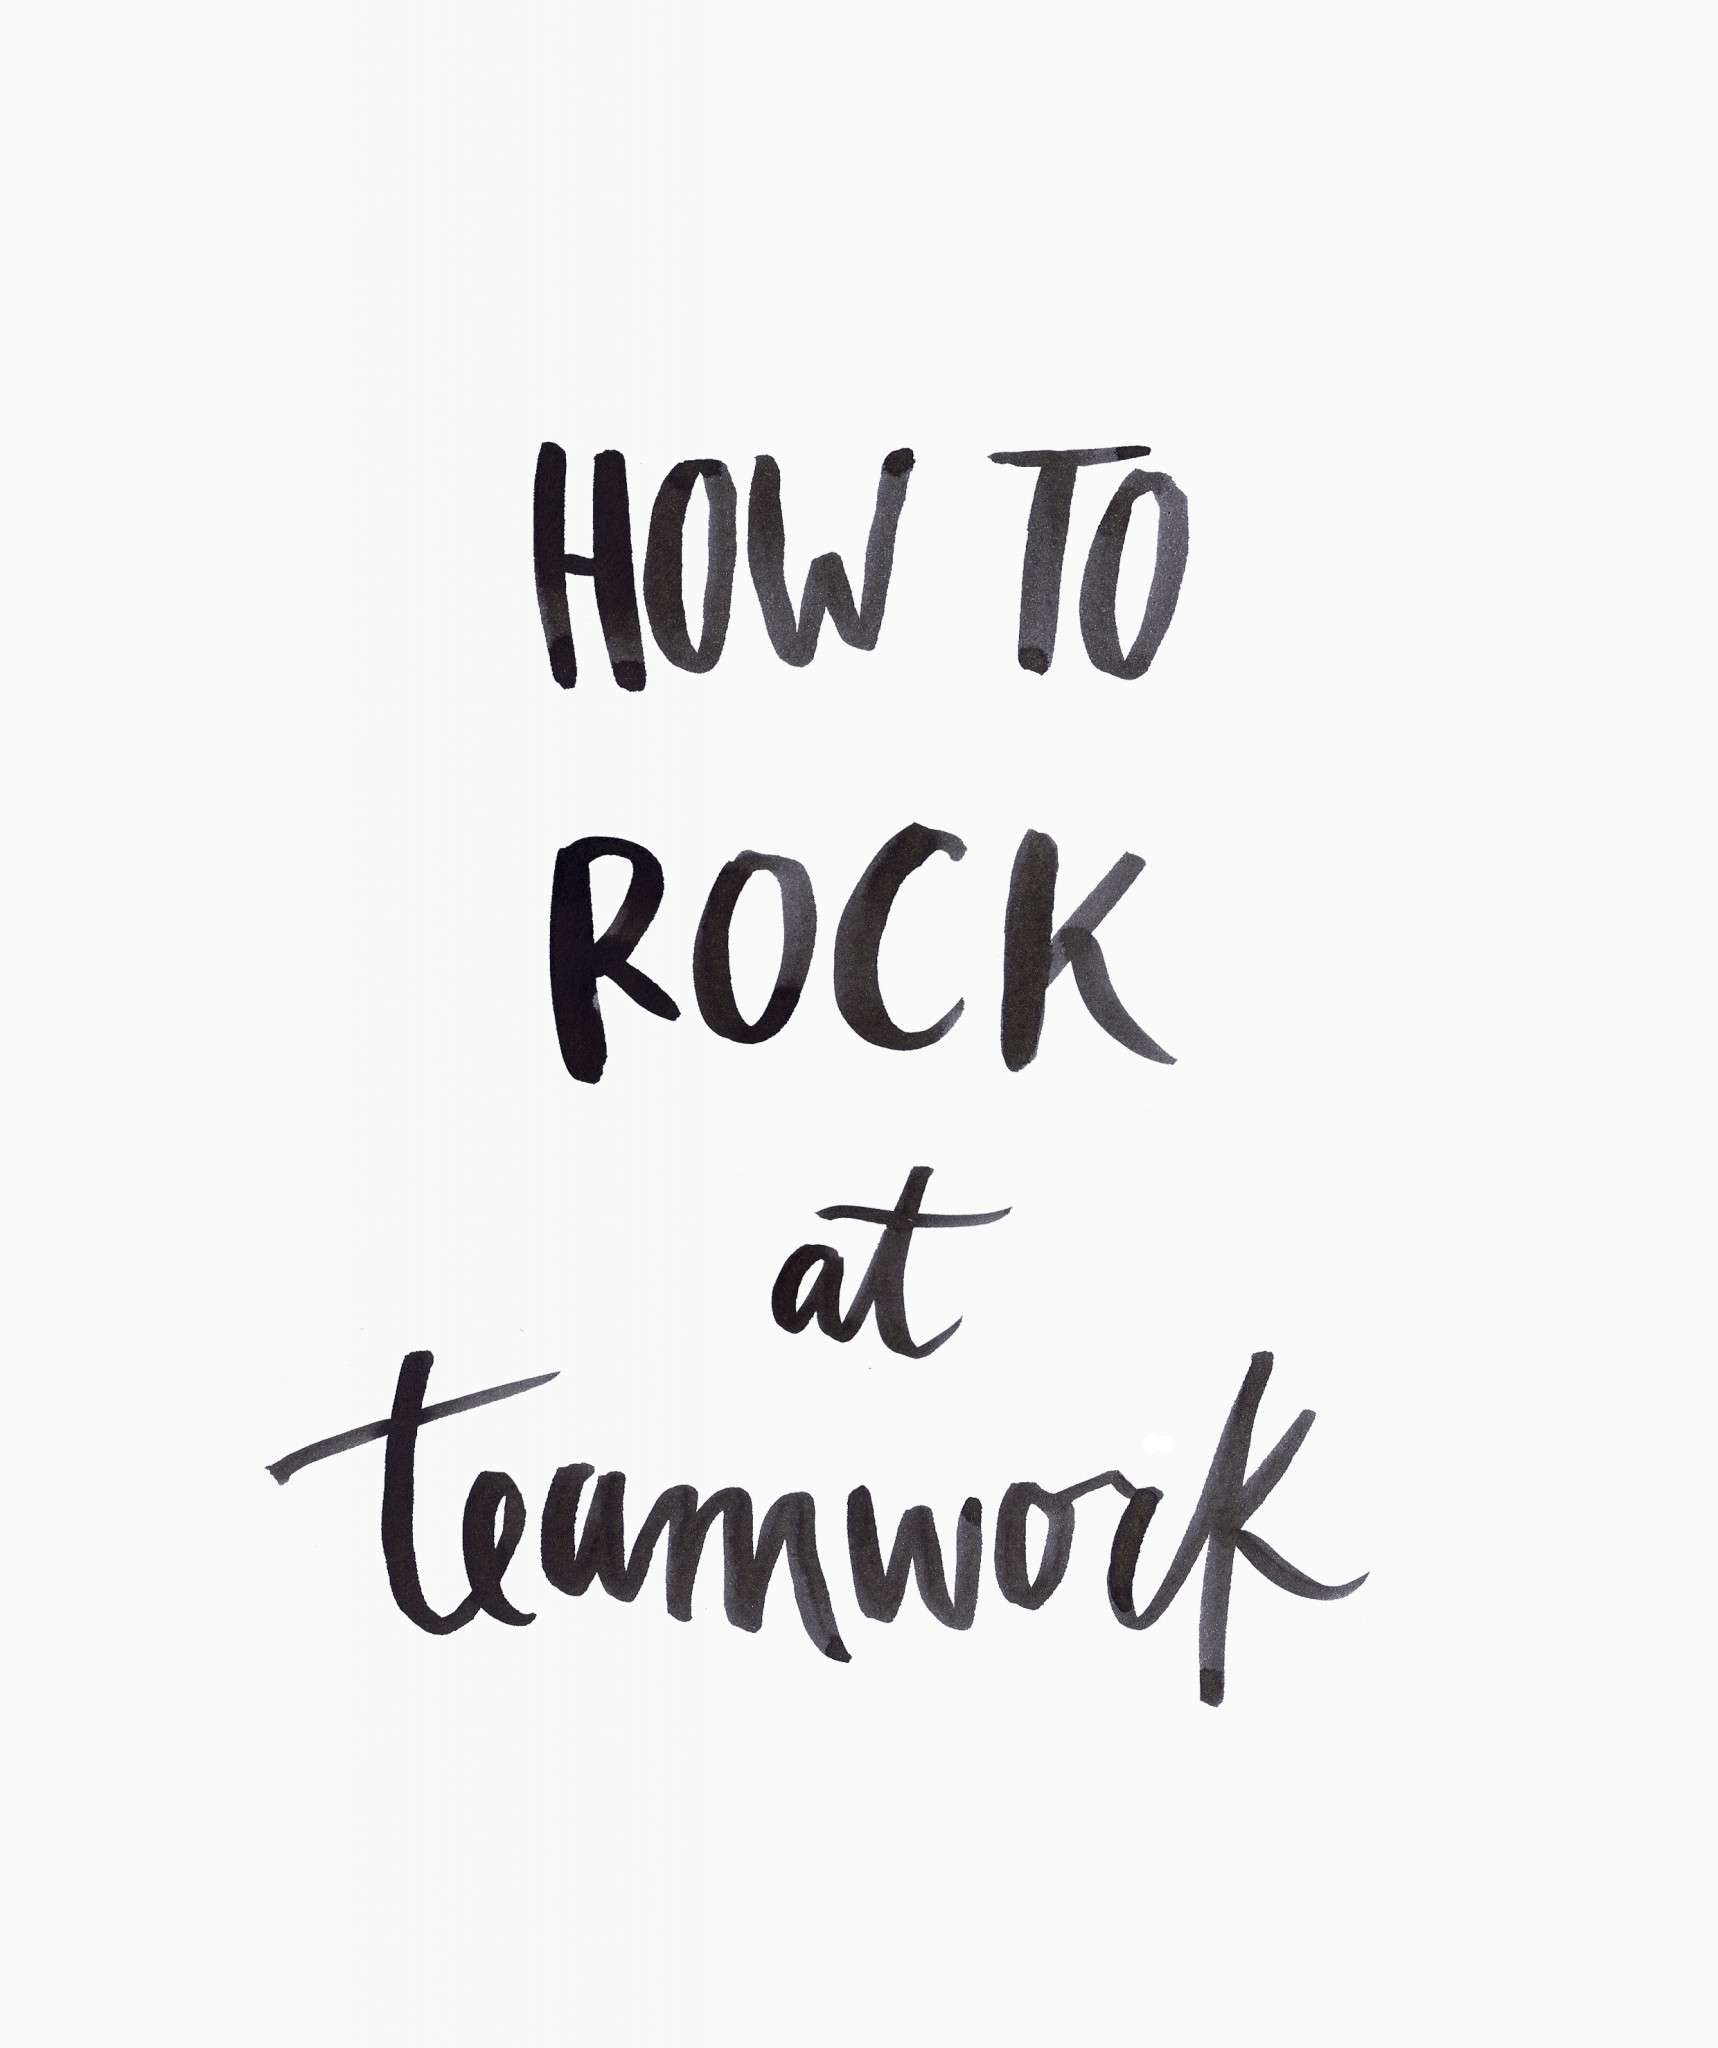 how-to-rock-at-teamwork-handlettered